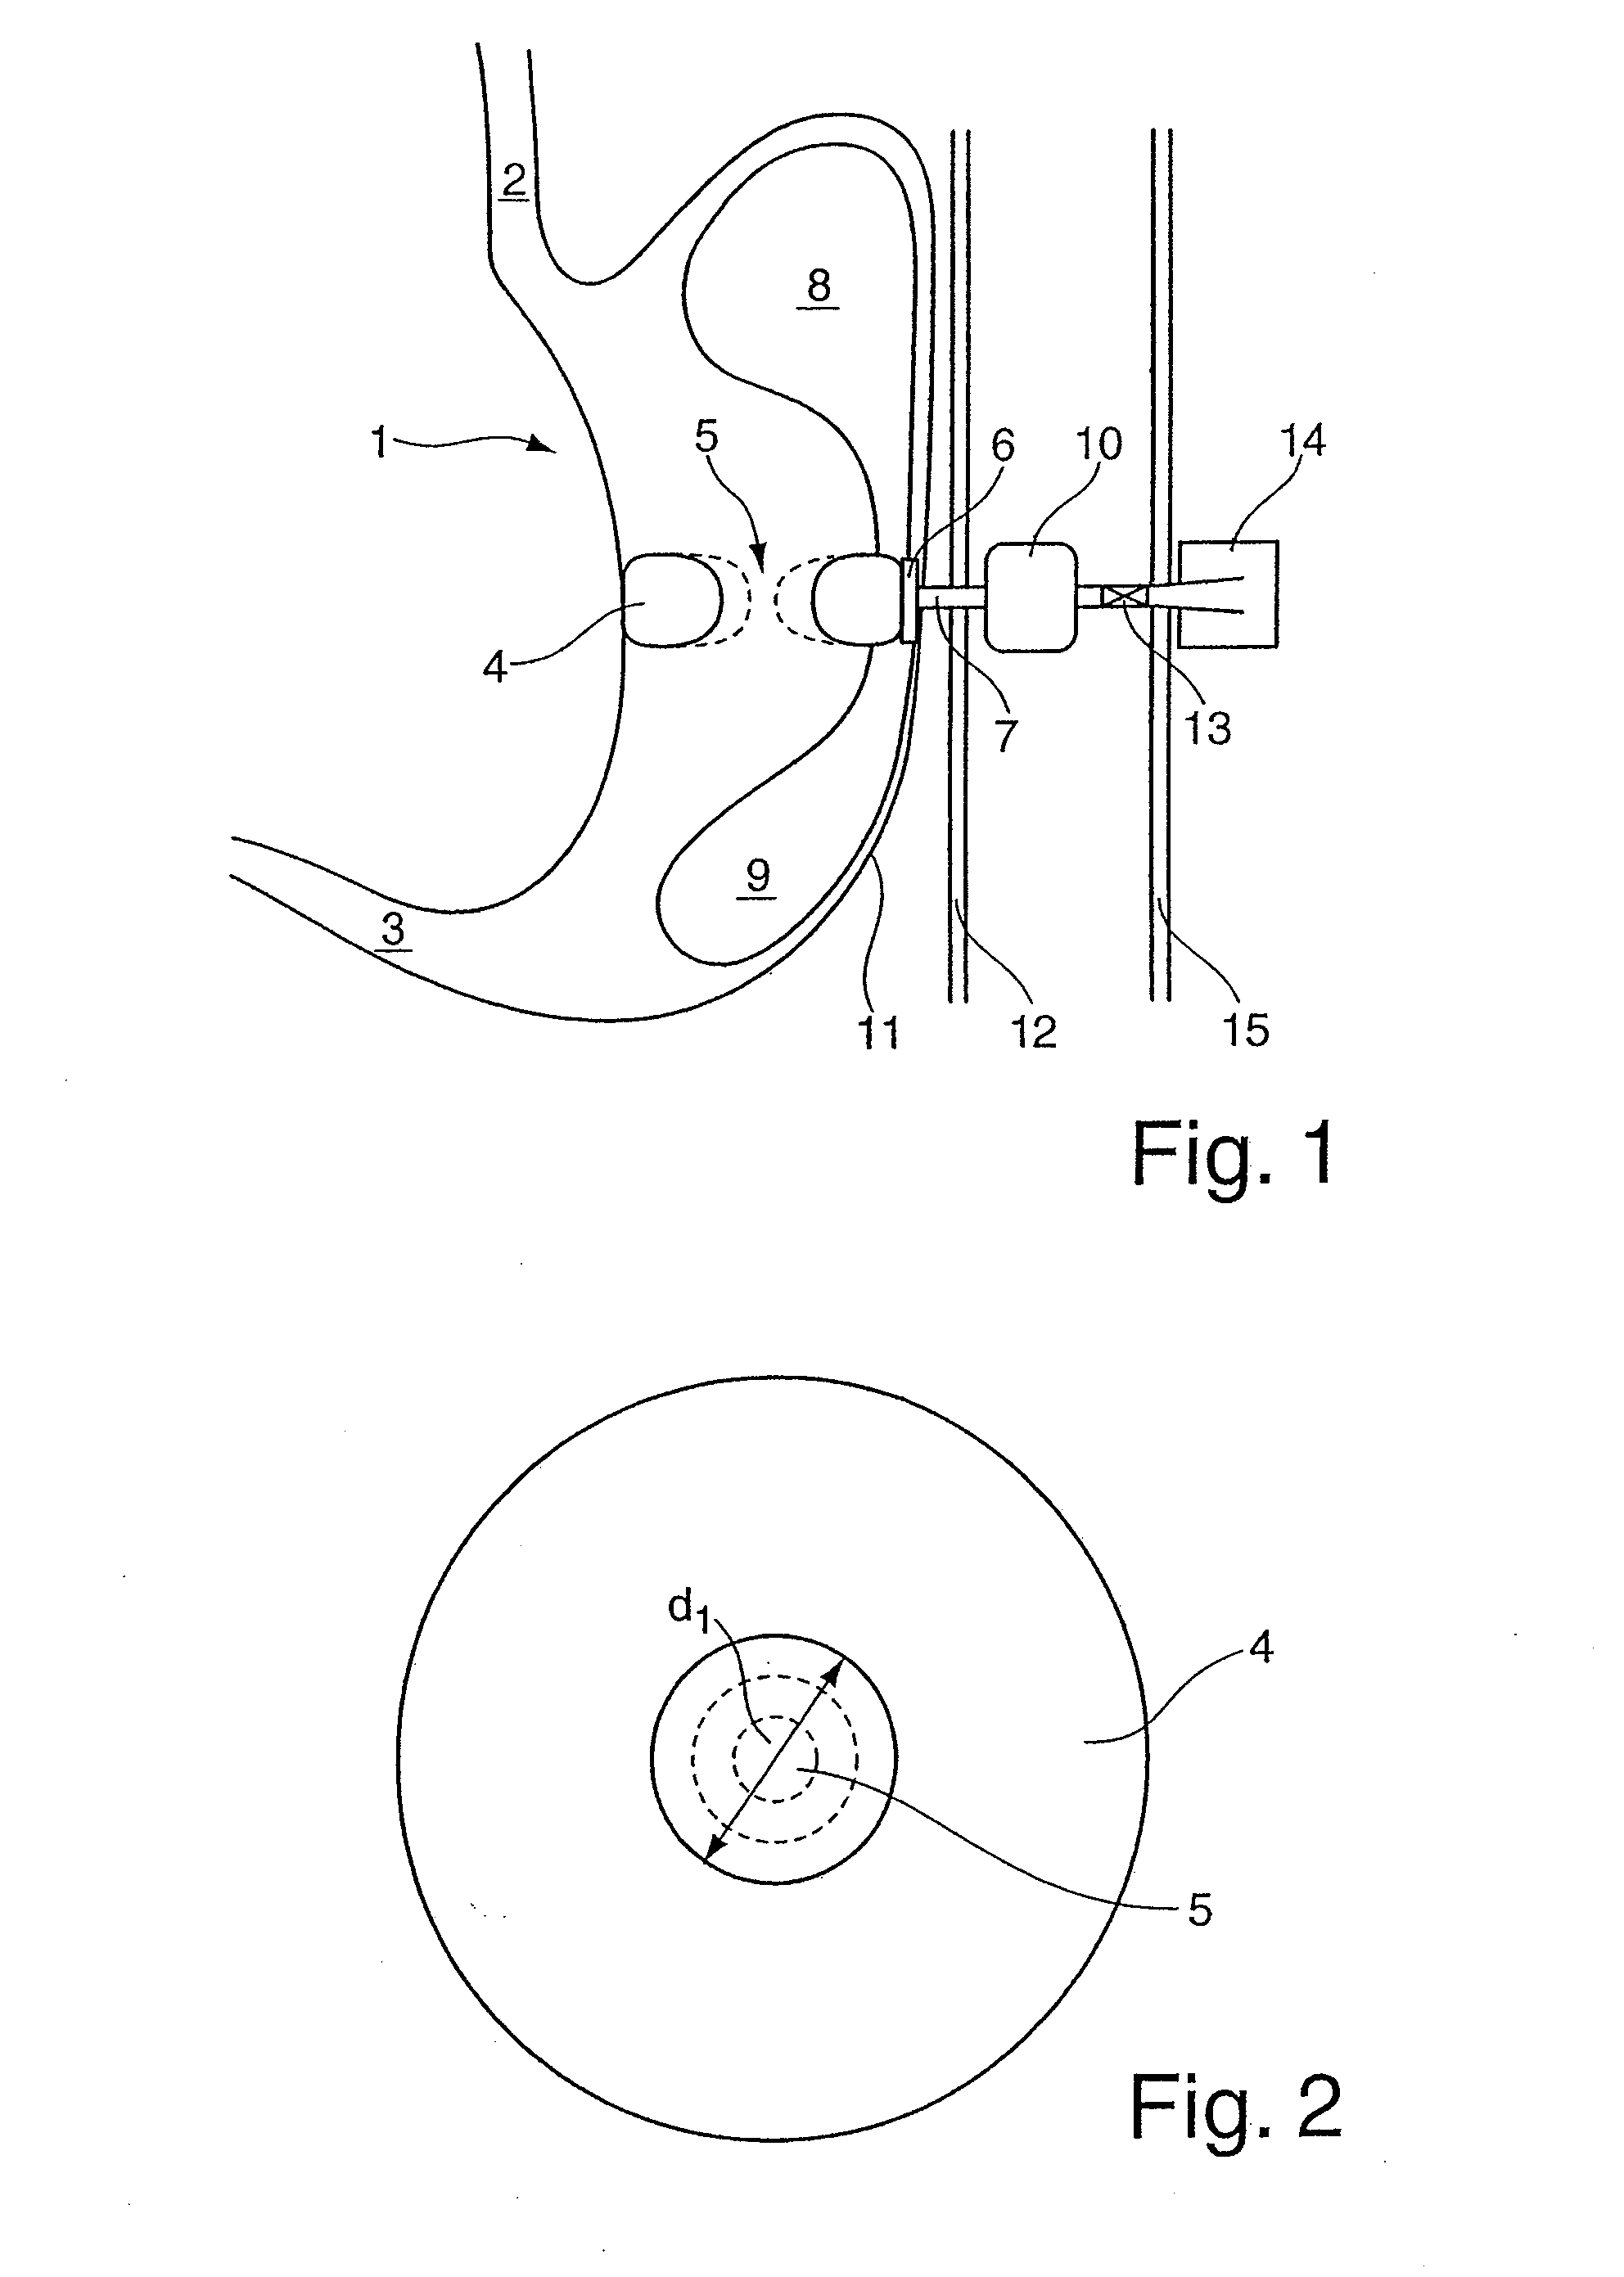 Device for treating obesity